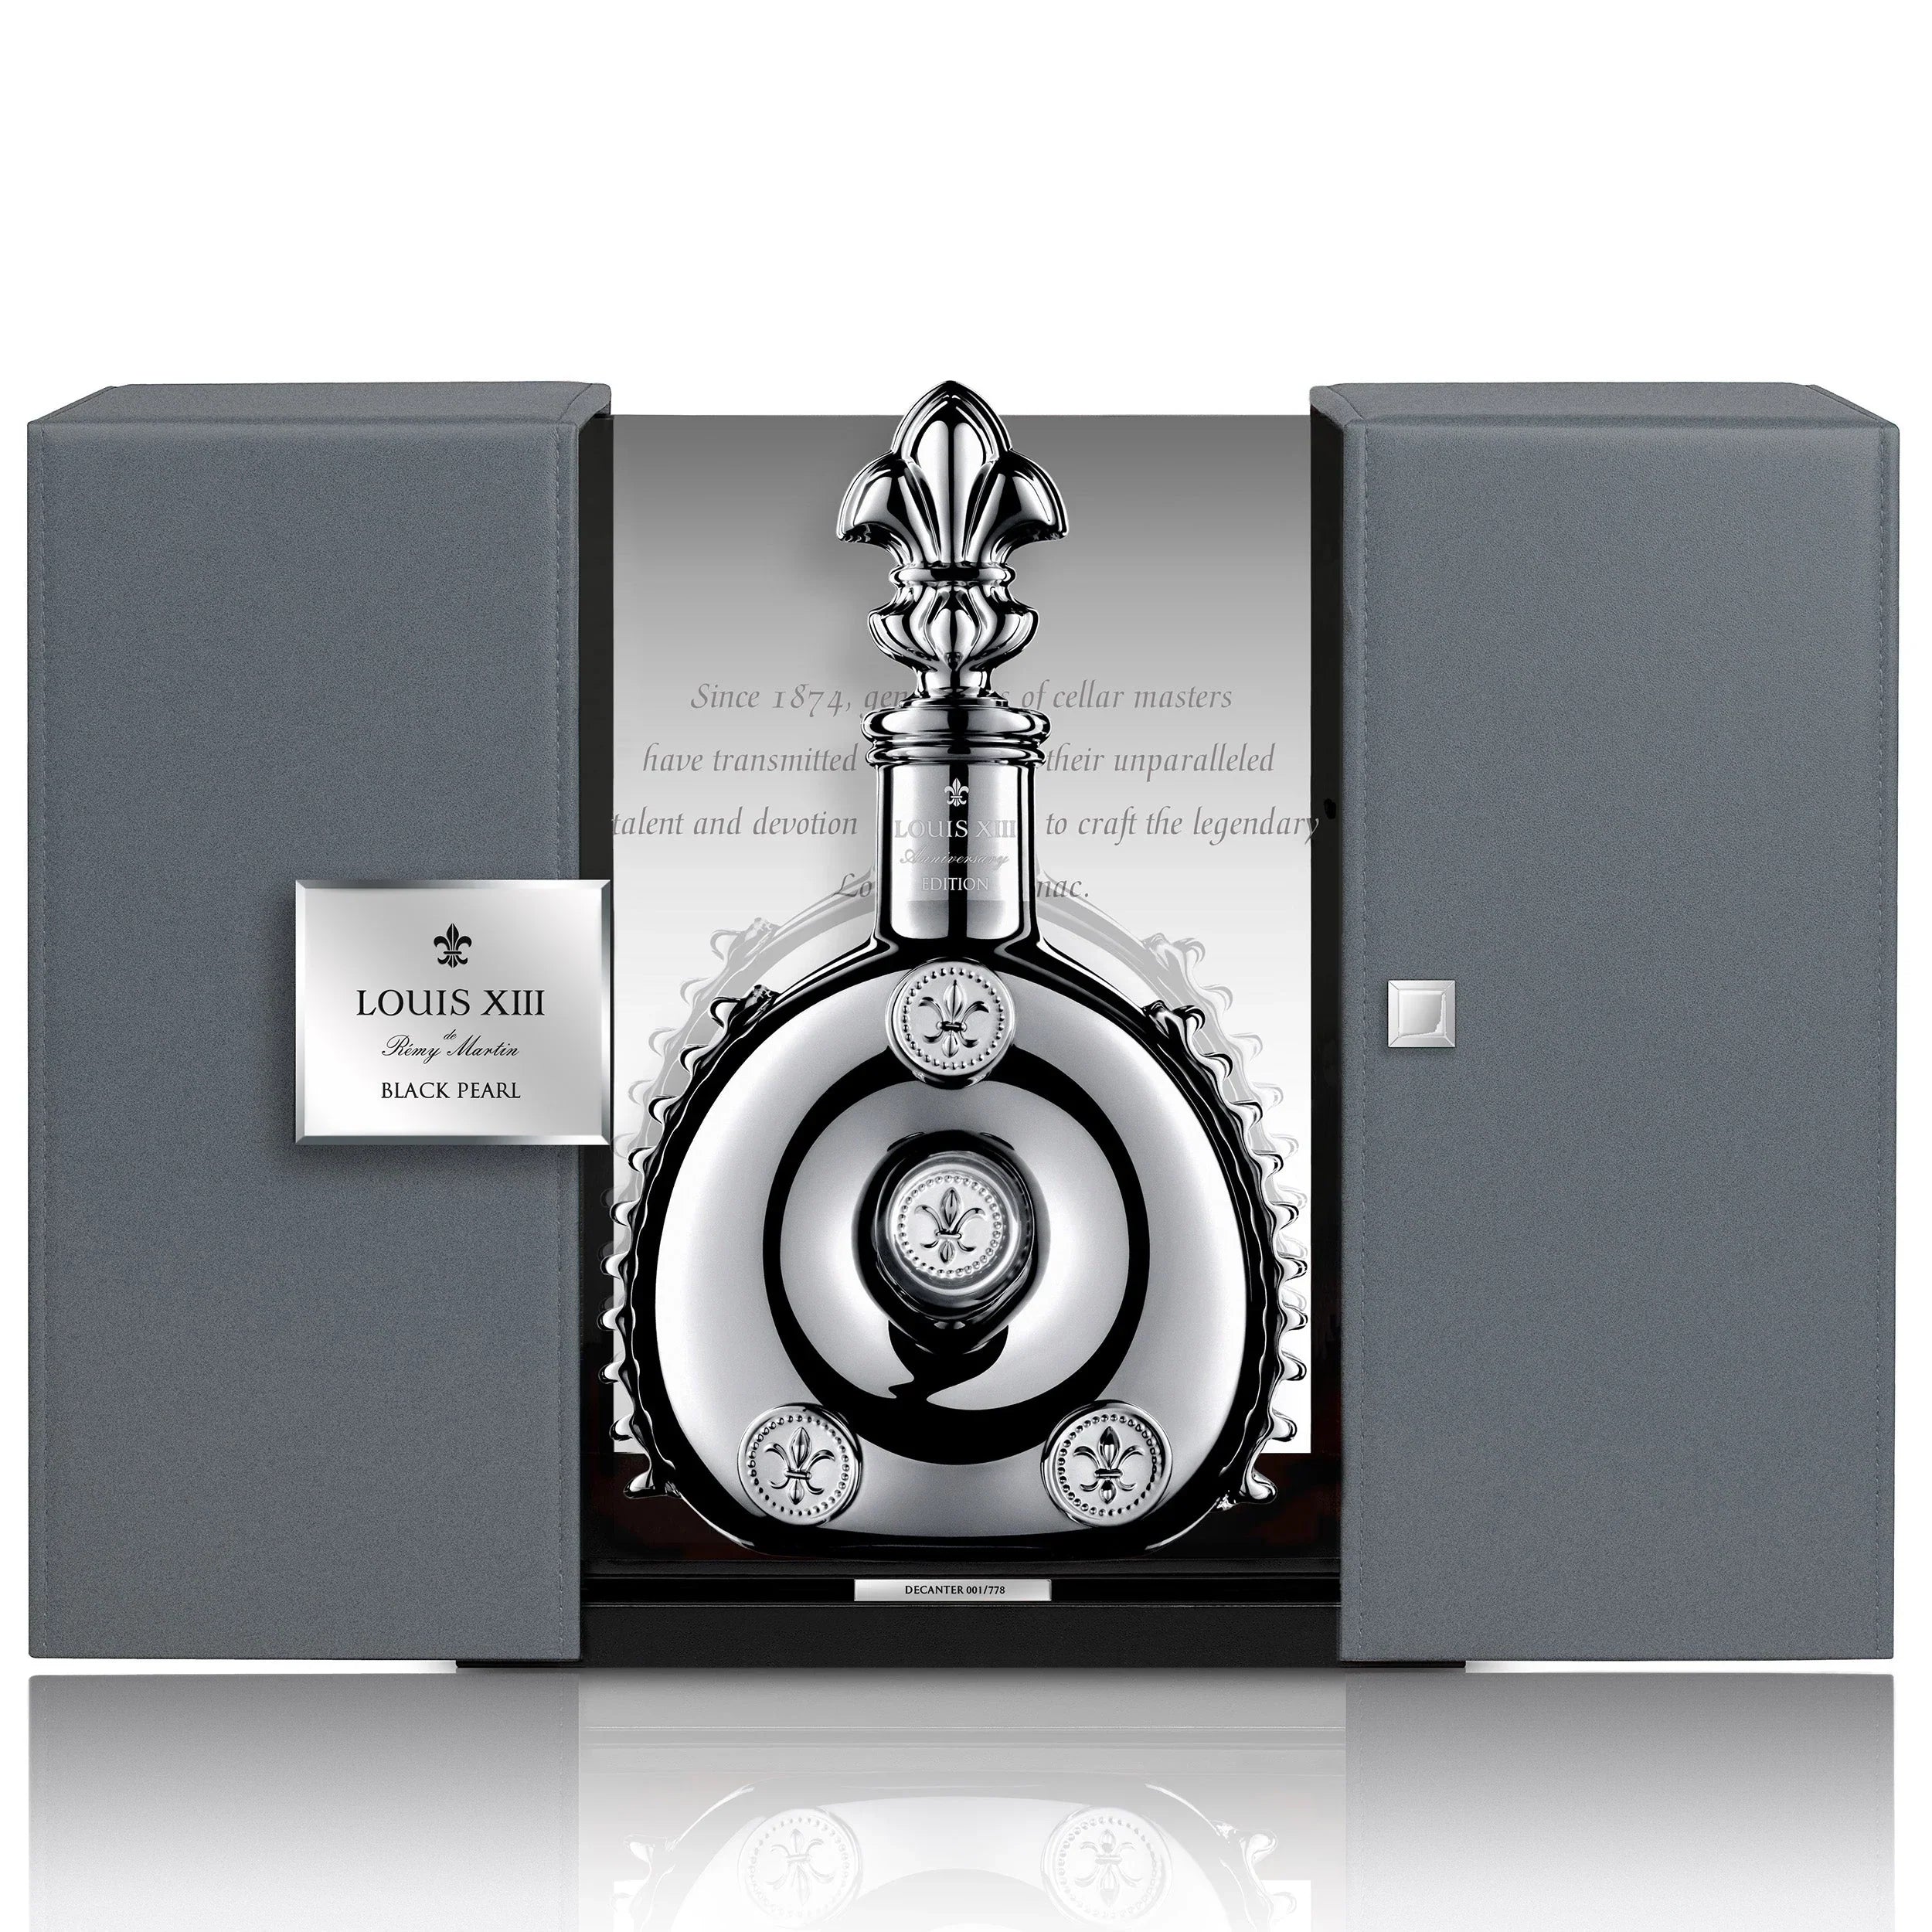 KING LOUIS XIII RARE CASK 750ml – Whisky and Whiskey